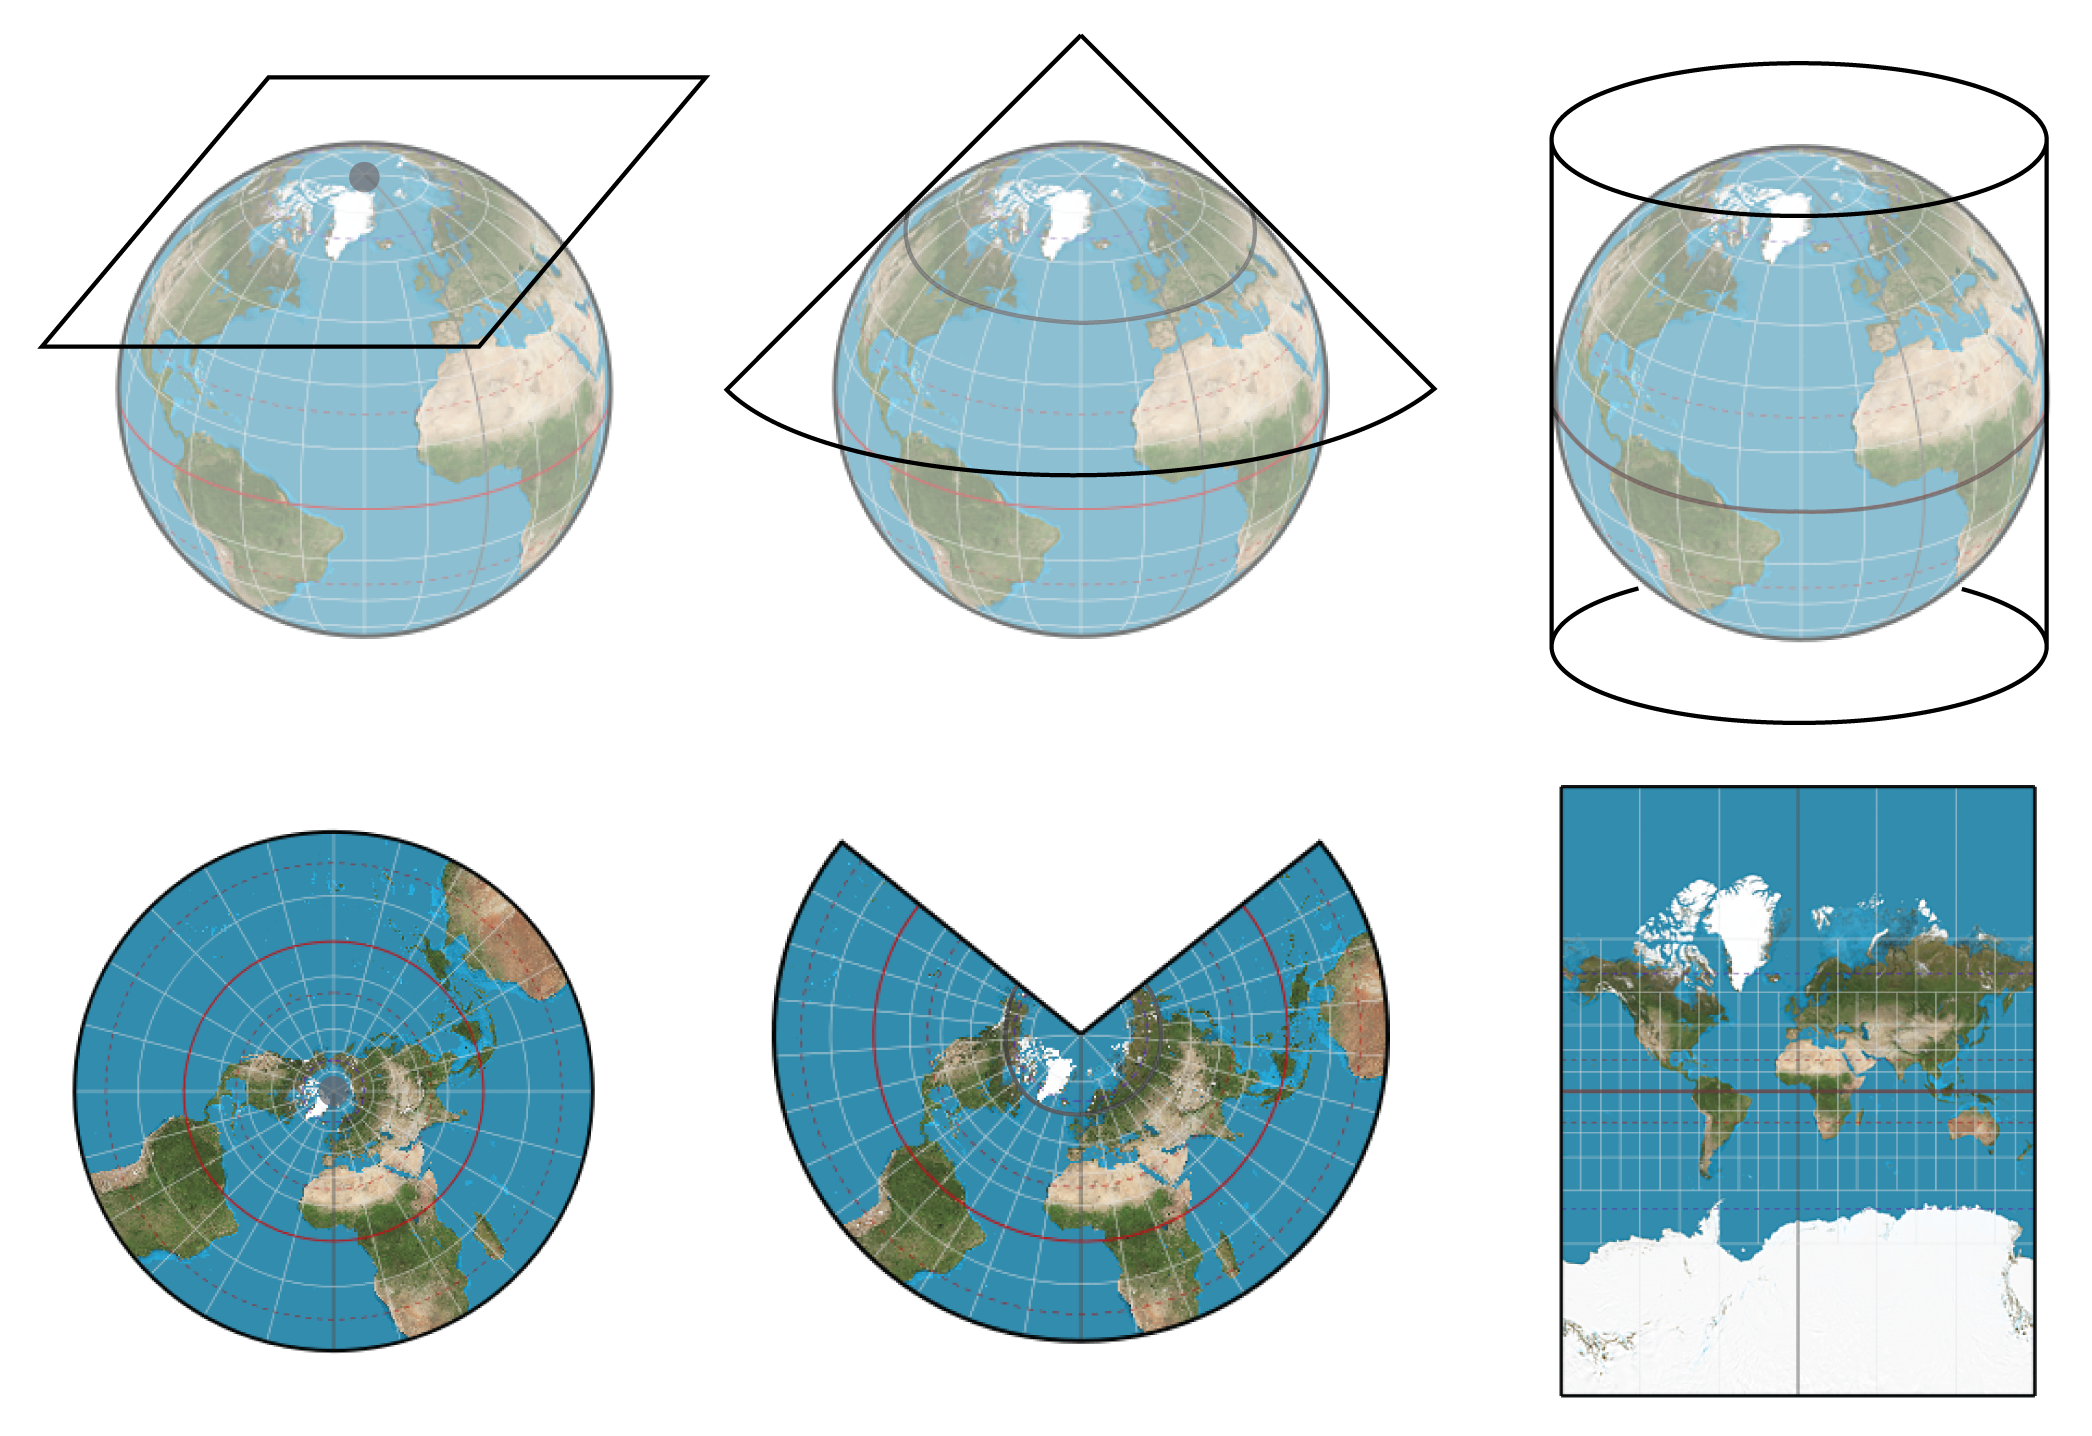 various methods of projection - Azimuthal projection, conical projection and cylindrical projection